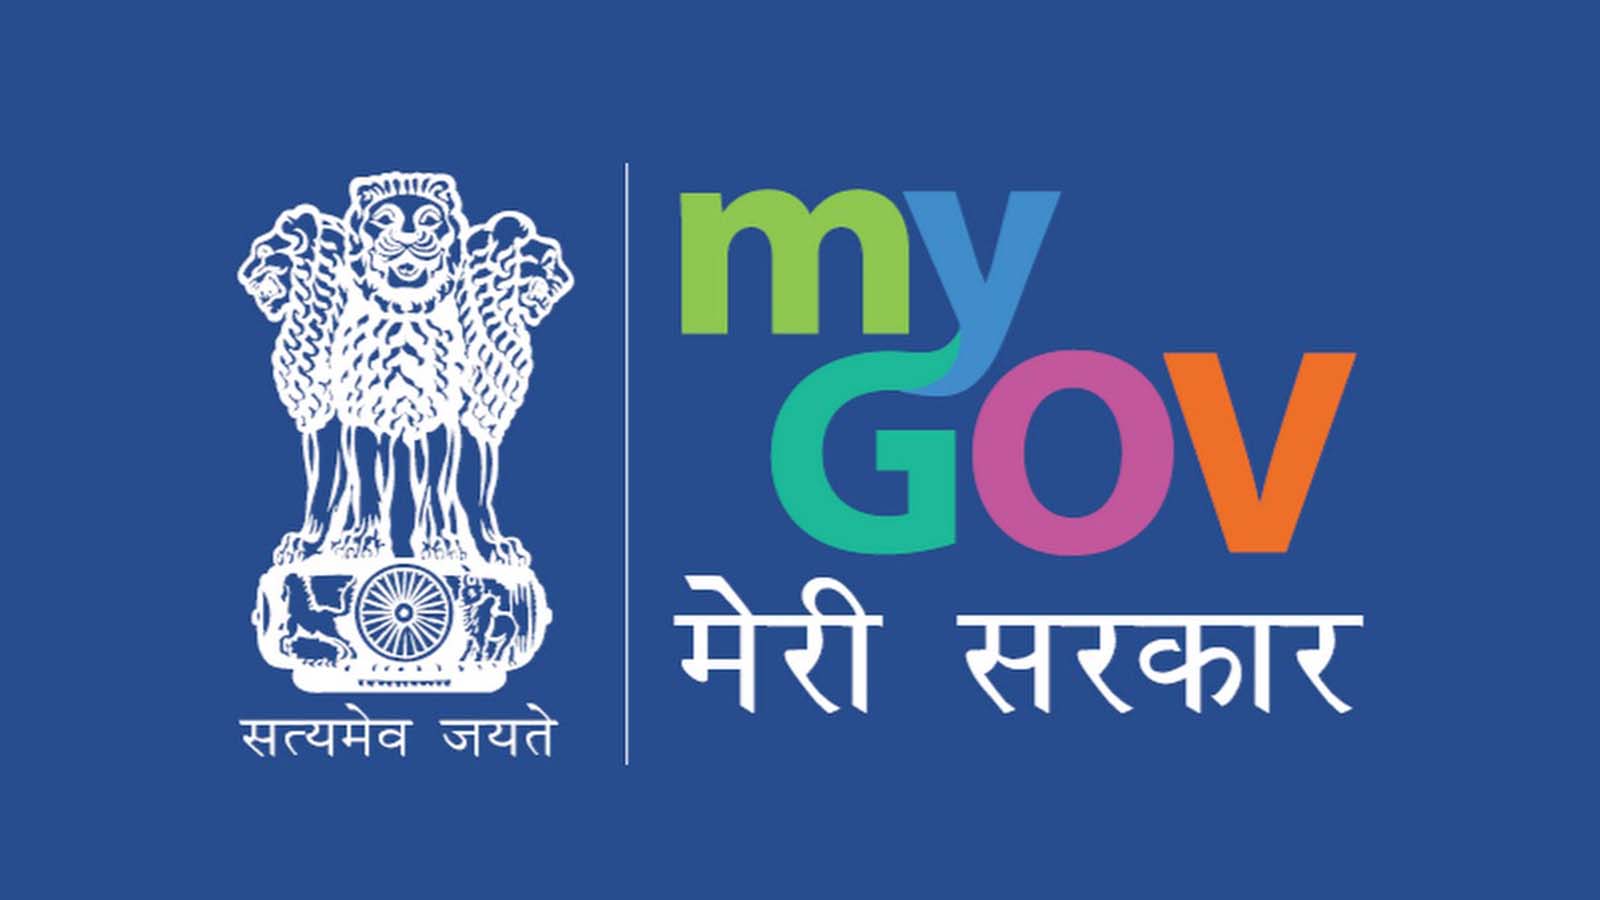 What are MOTTOS in logo of government institutions